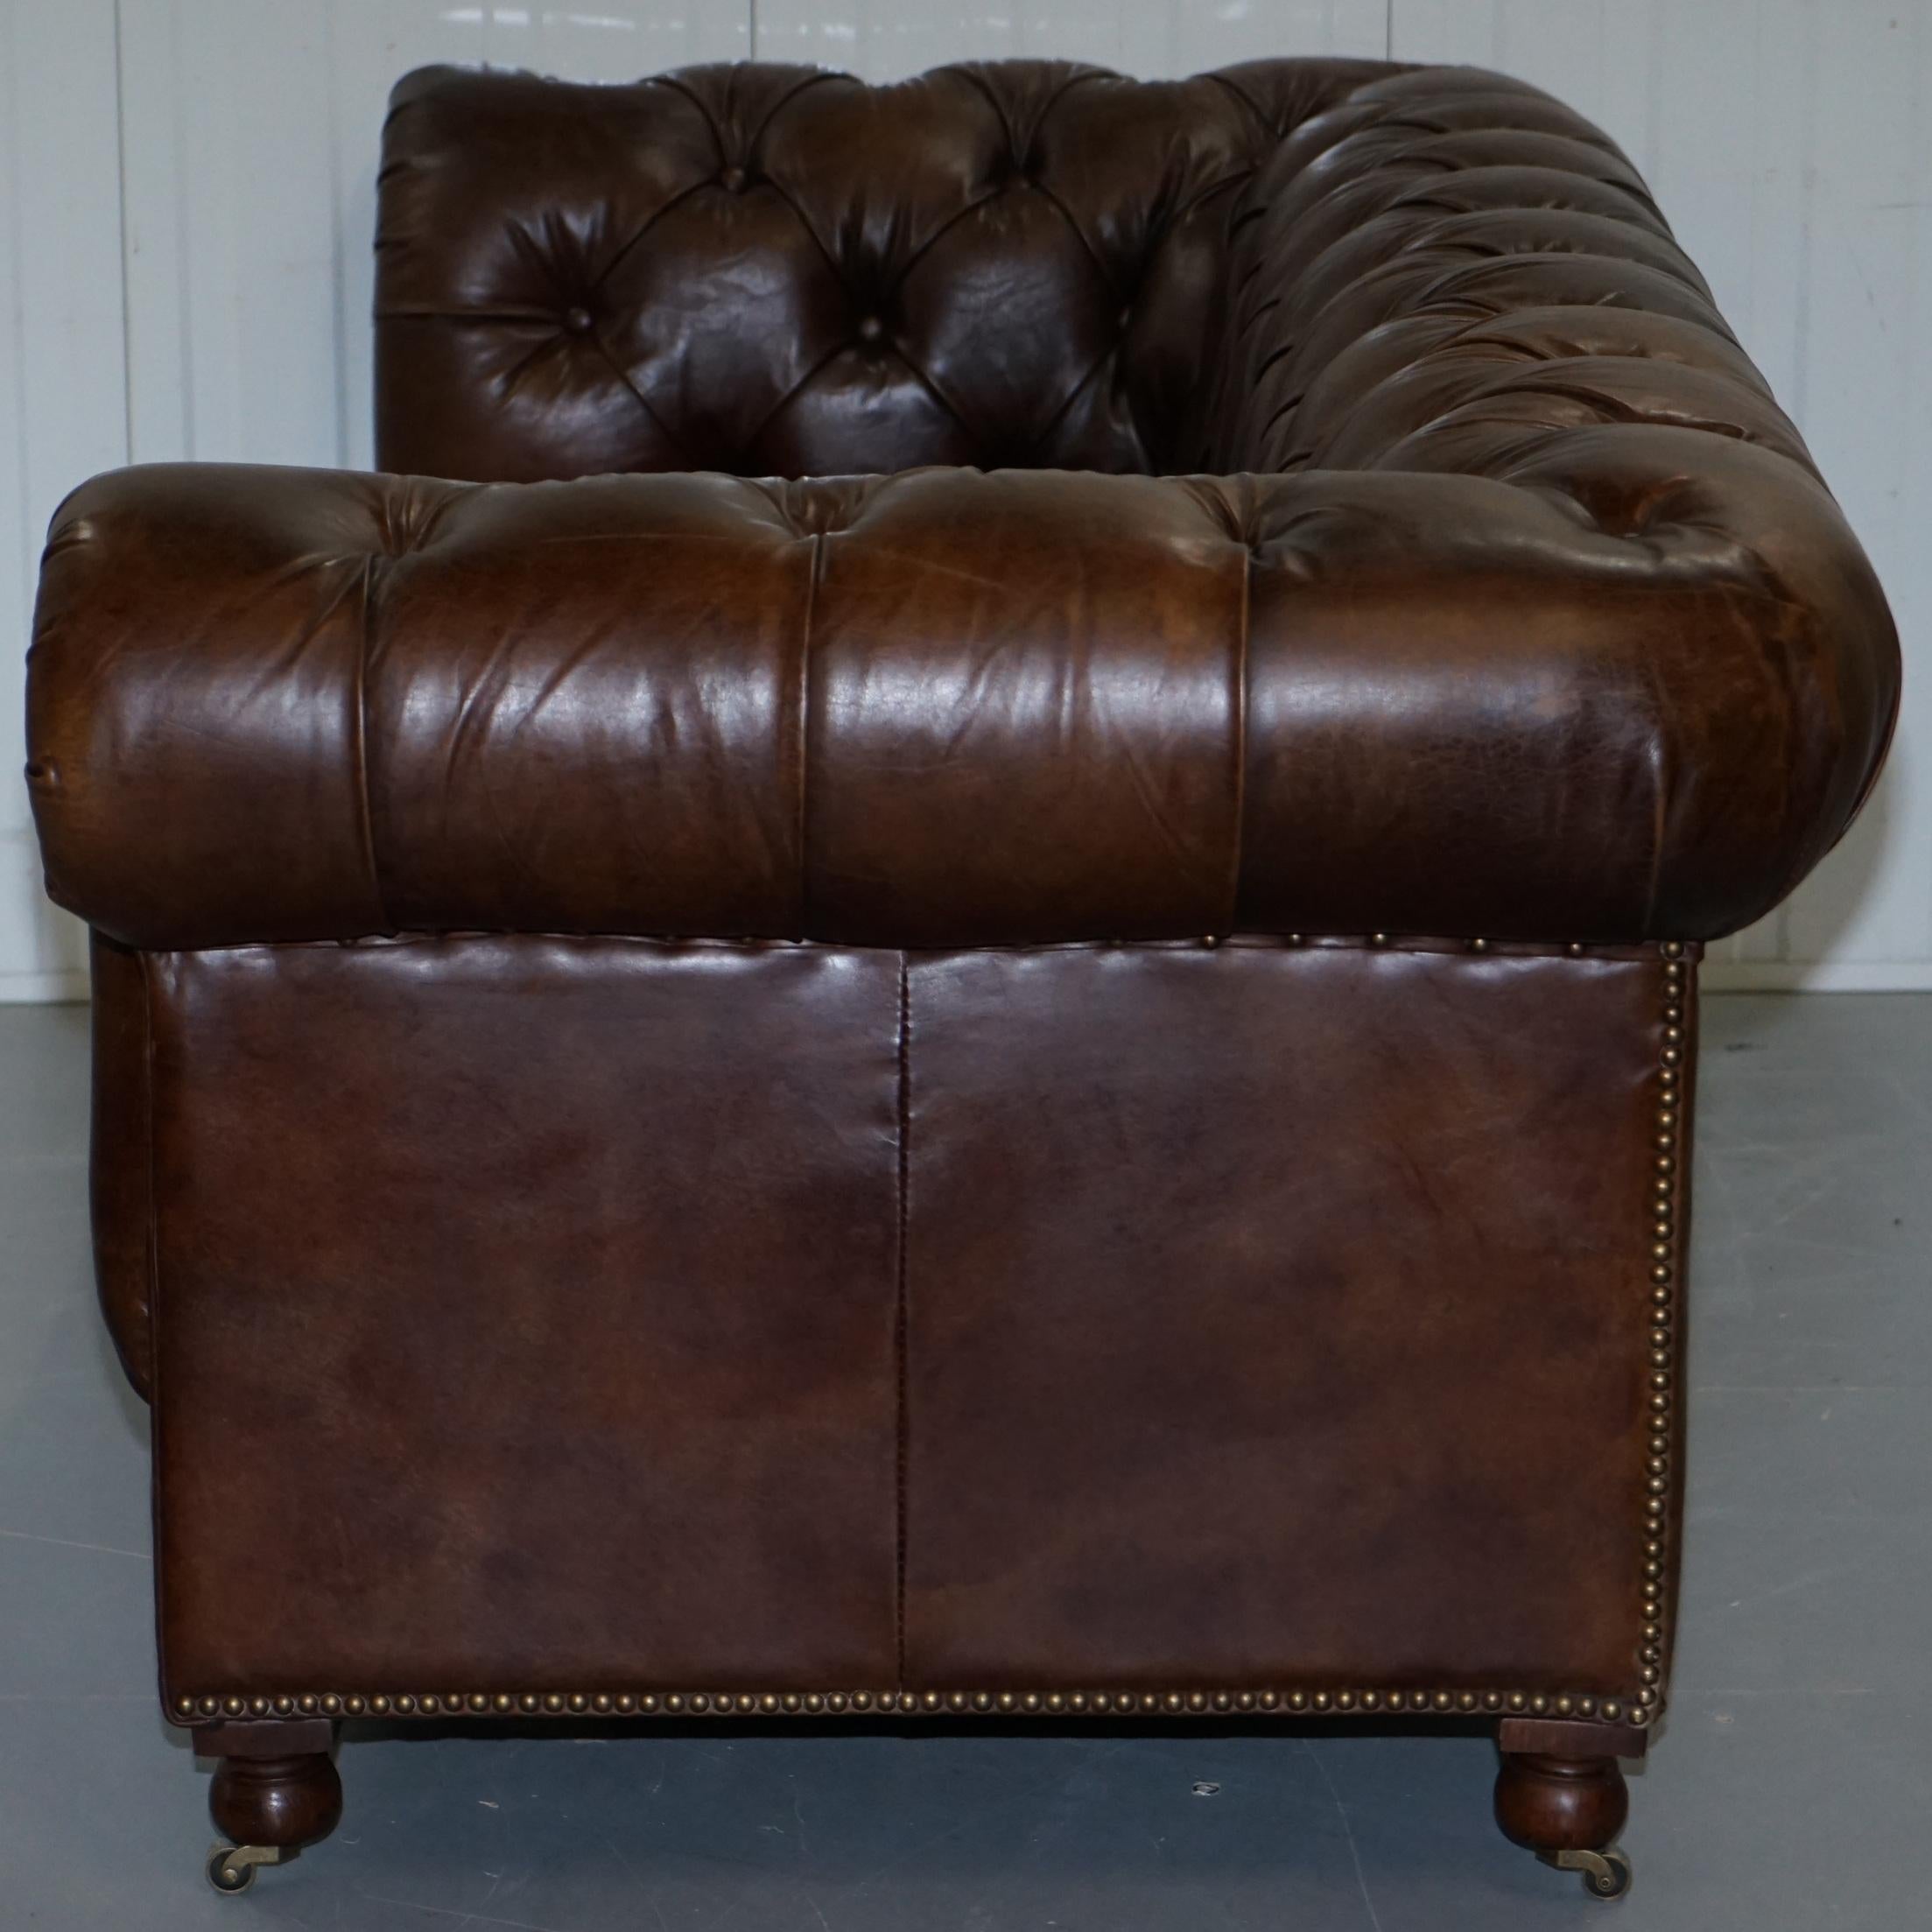 Stunning Timothy Oulton Westminster Brown Leather Chesterfield Sofa 12